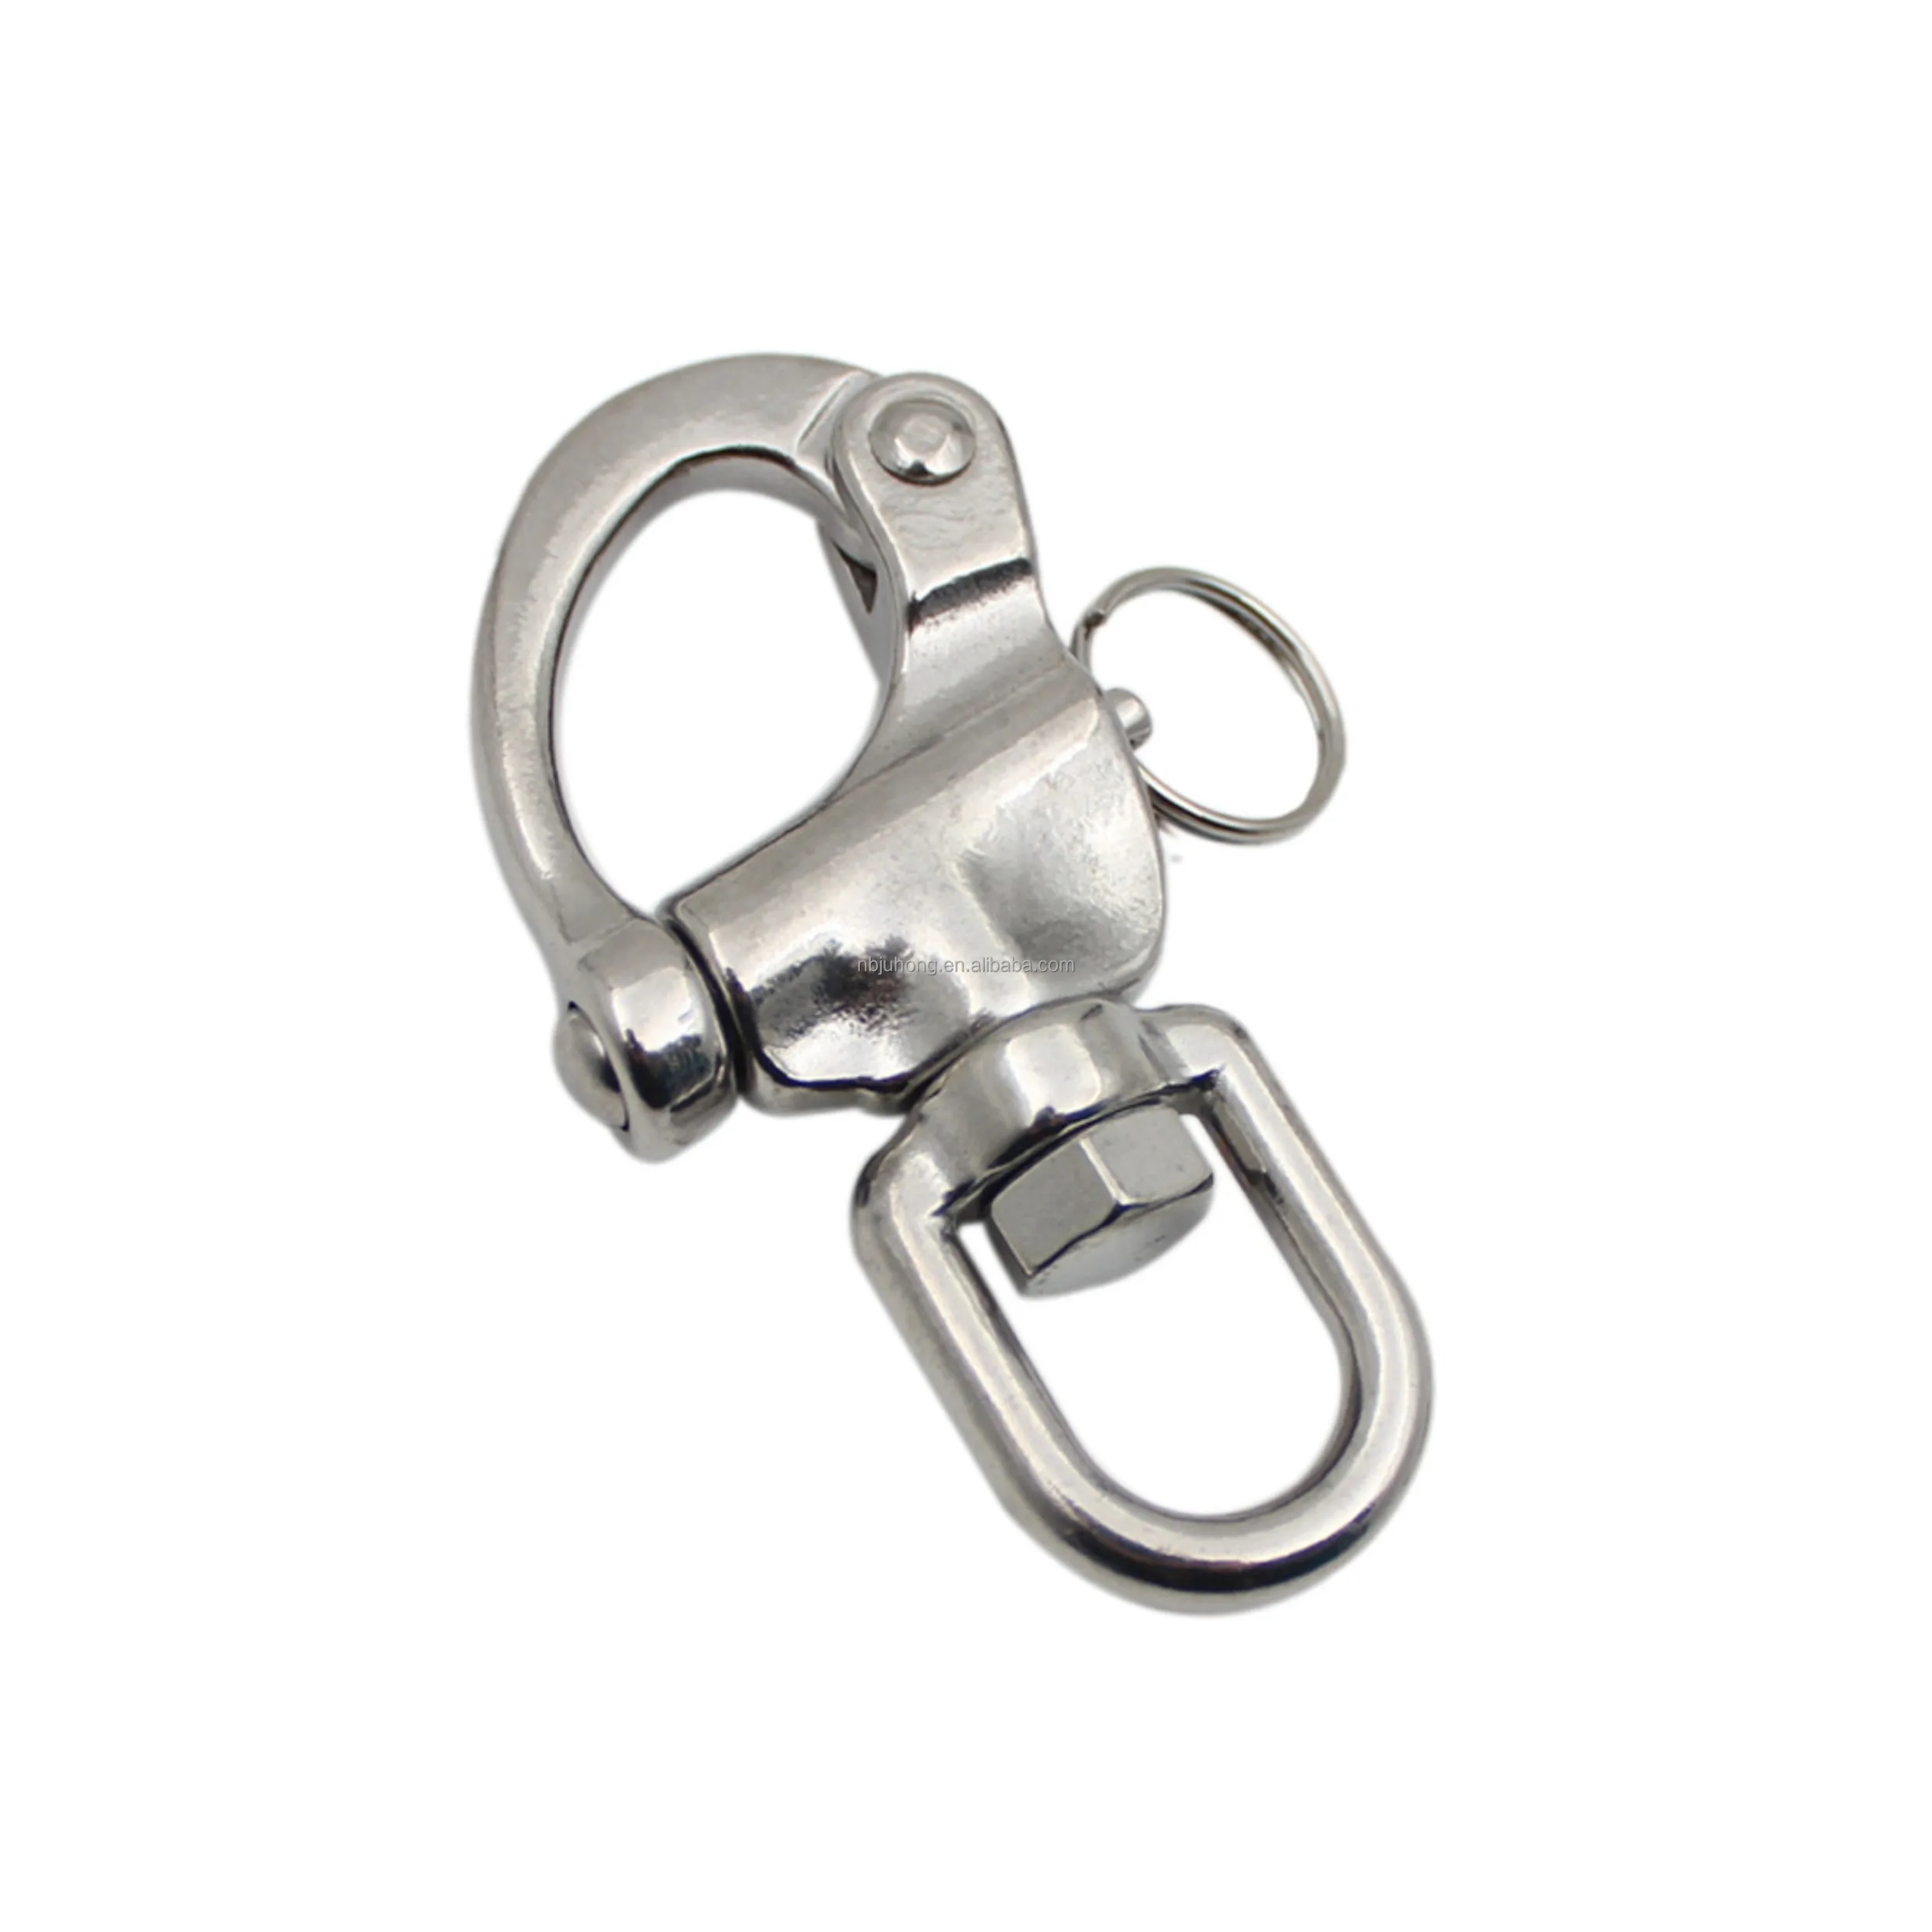 Thorn Jaw Swivel Eye Snap Shackle Quick Release Bail Rigging Sailing Boat Marine 316 Stainless Steel Pair of 2 